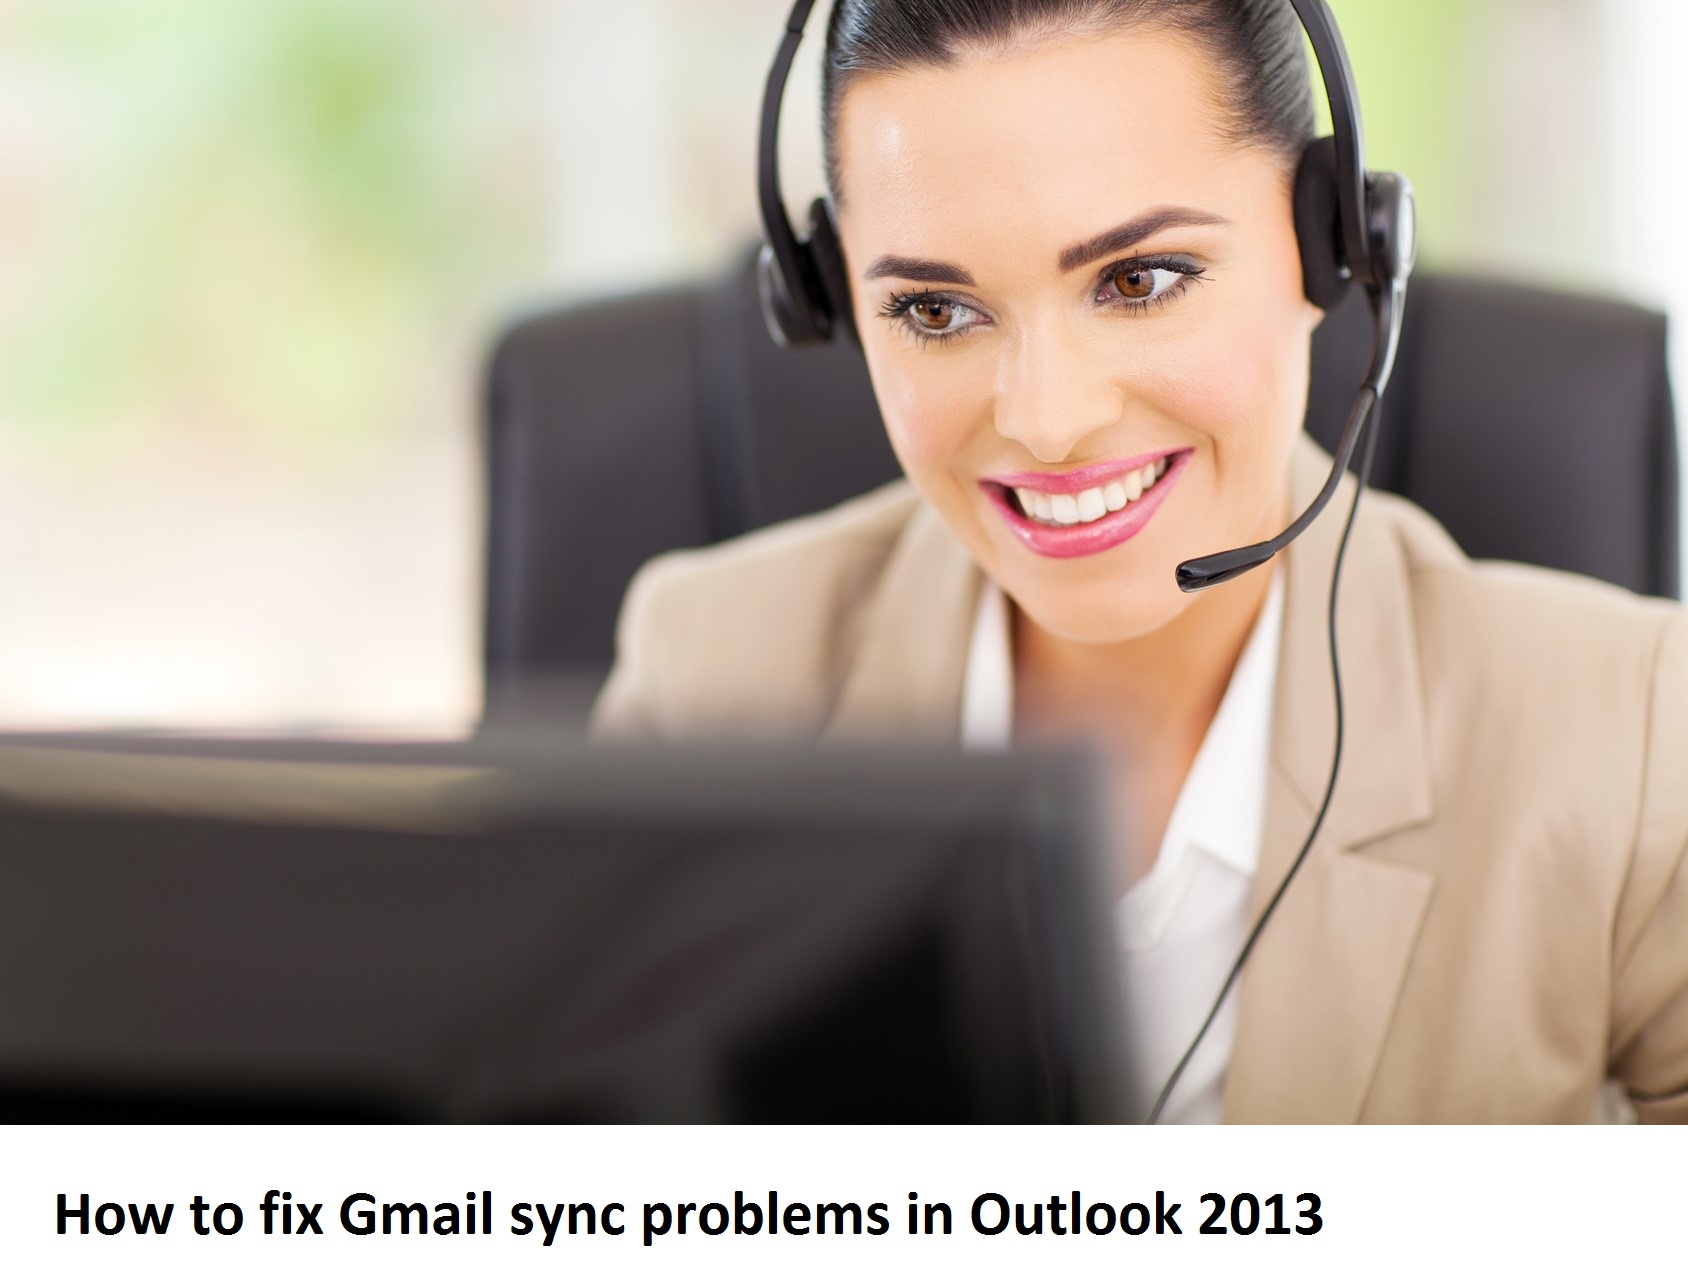 How to fix Gmail sync problems in Outlook 2013